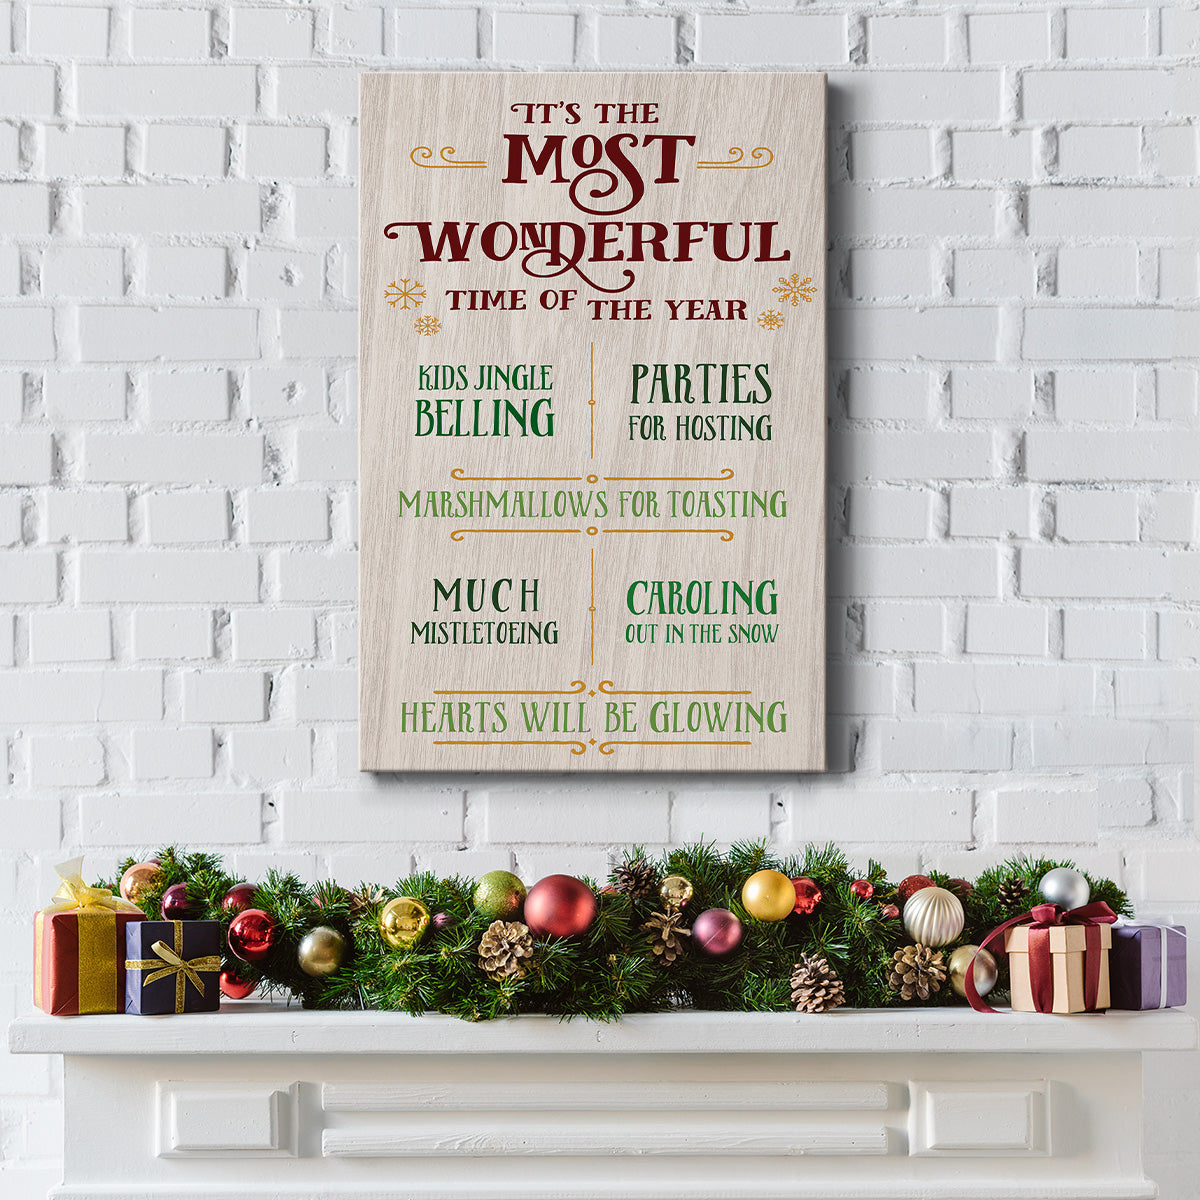 Most Wonderful - Gallery Wrapped Canvas